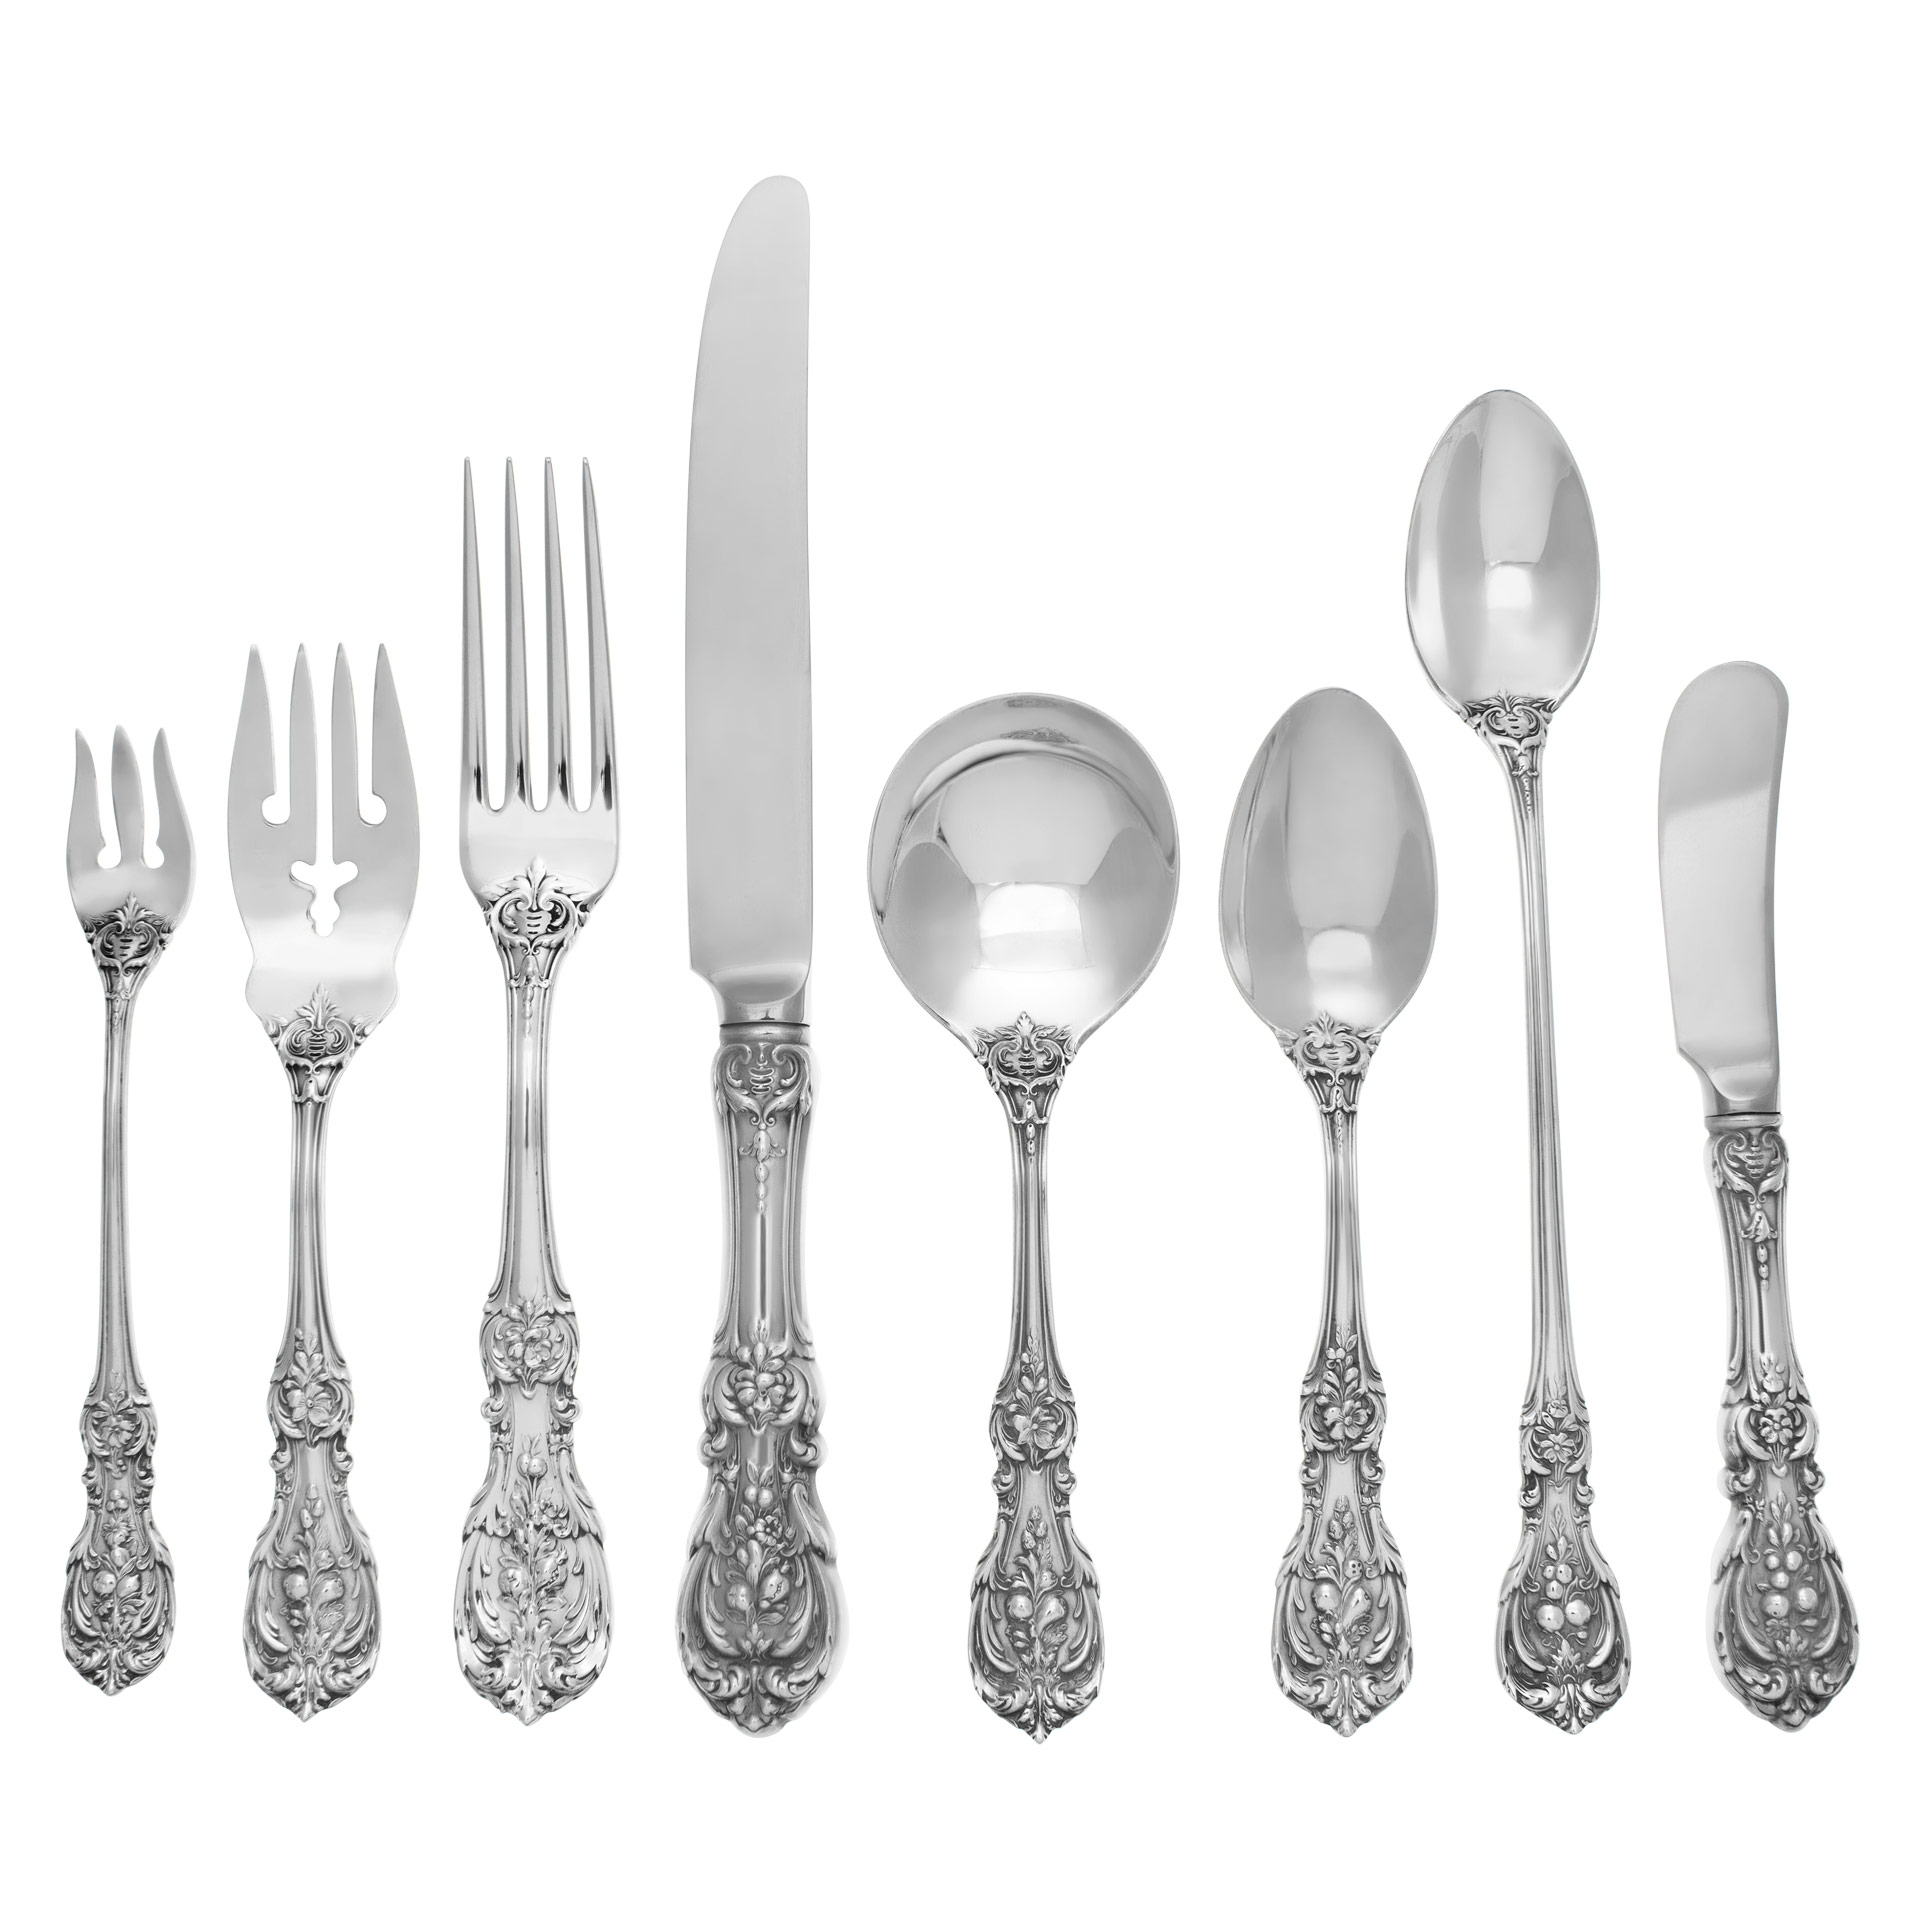 "FRANCIS THE FIRST" Sterling Silver Flatware set patented in 1907 by Reed & Barton- 5 places setting for 16 (with xtras) and 9 serving pieces. Over 6000 grams (193 troy ounces) sterling silver-. image 1